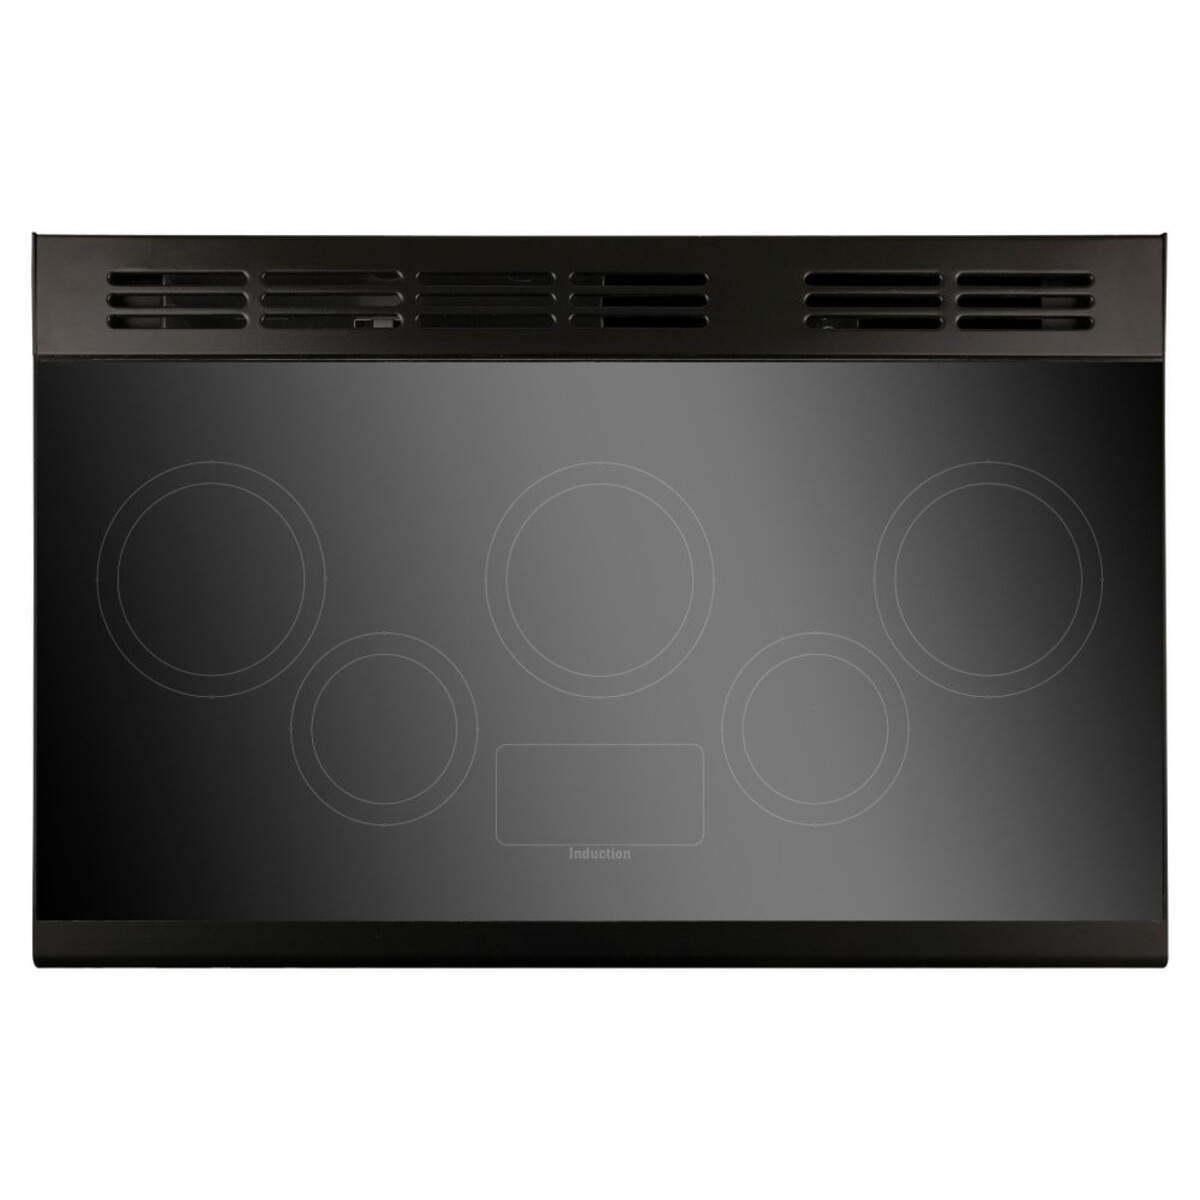 Rangemaster PDL90EICB/C PROFESSIONAL DELUXE 90cm Induction Cooker, Charcoal Bk